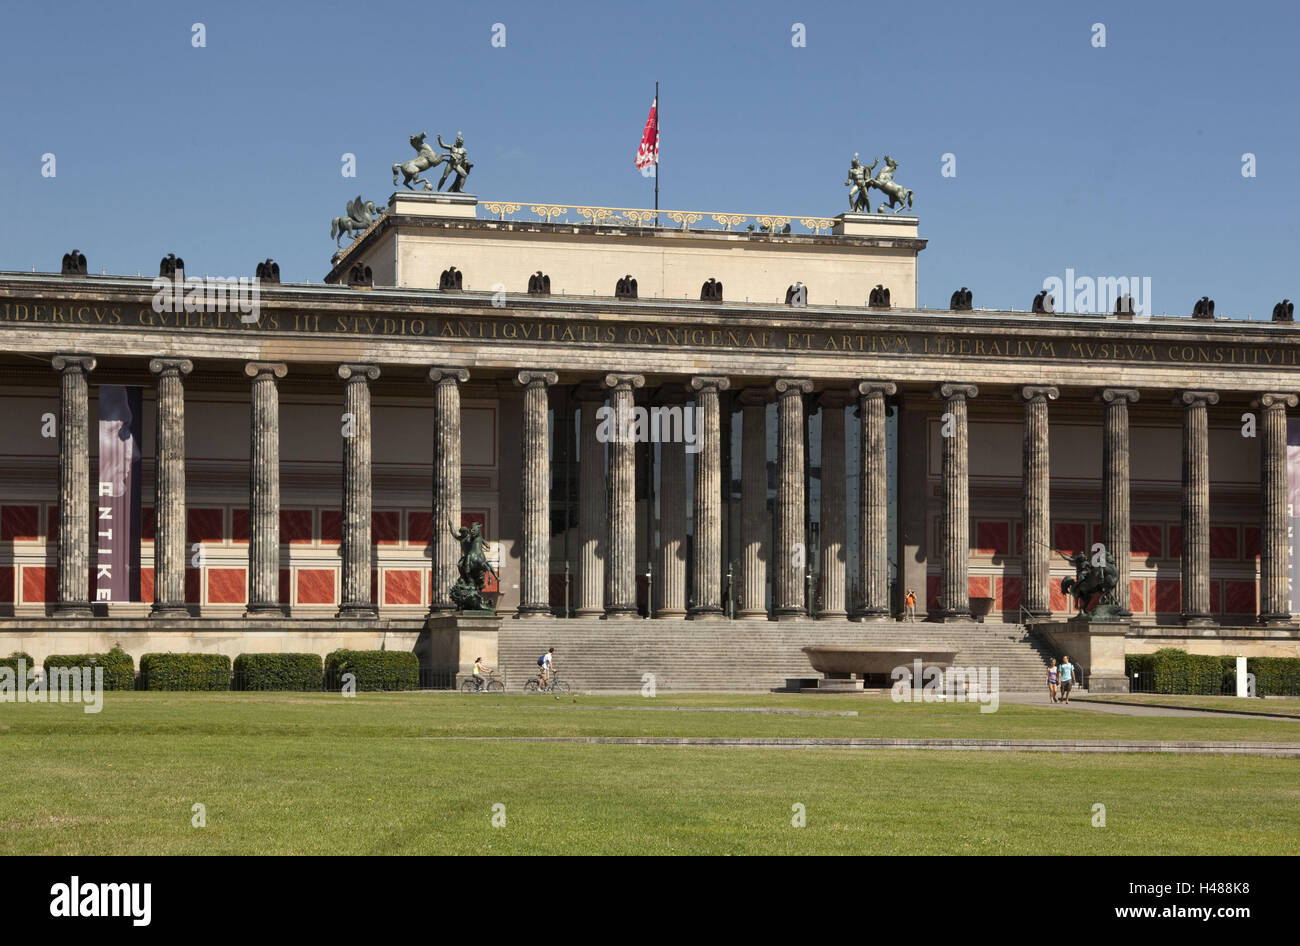 Germany, Berlin, old museum, town, architecture, building, structure, museum, classicism, flag, pillars, figures, statue, meadow, Stock Photo